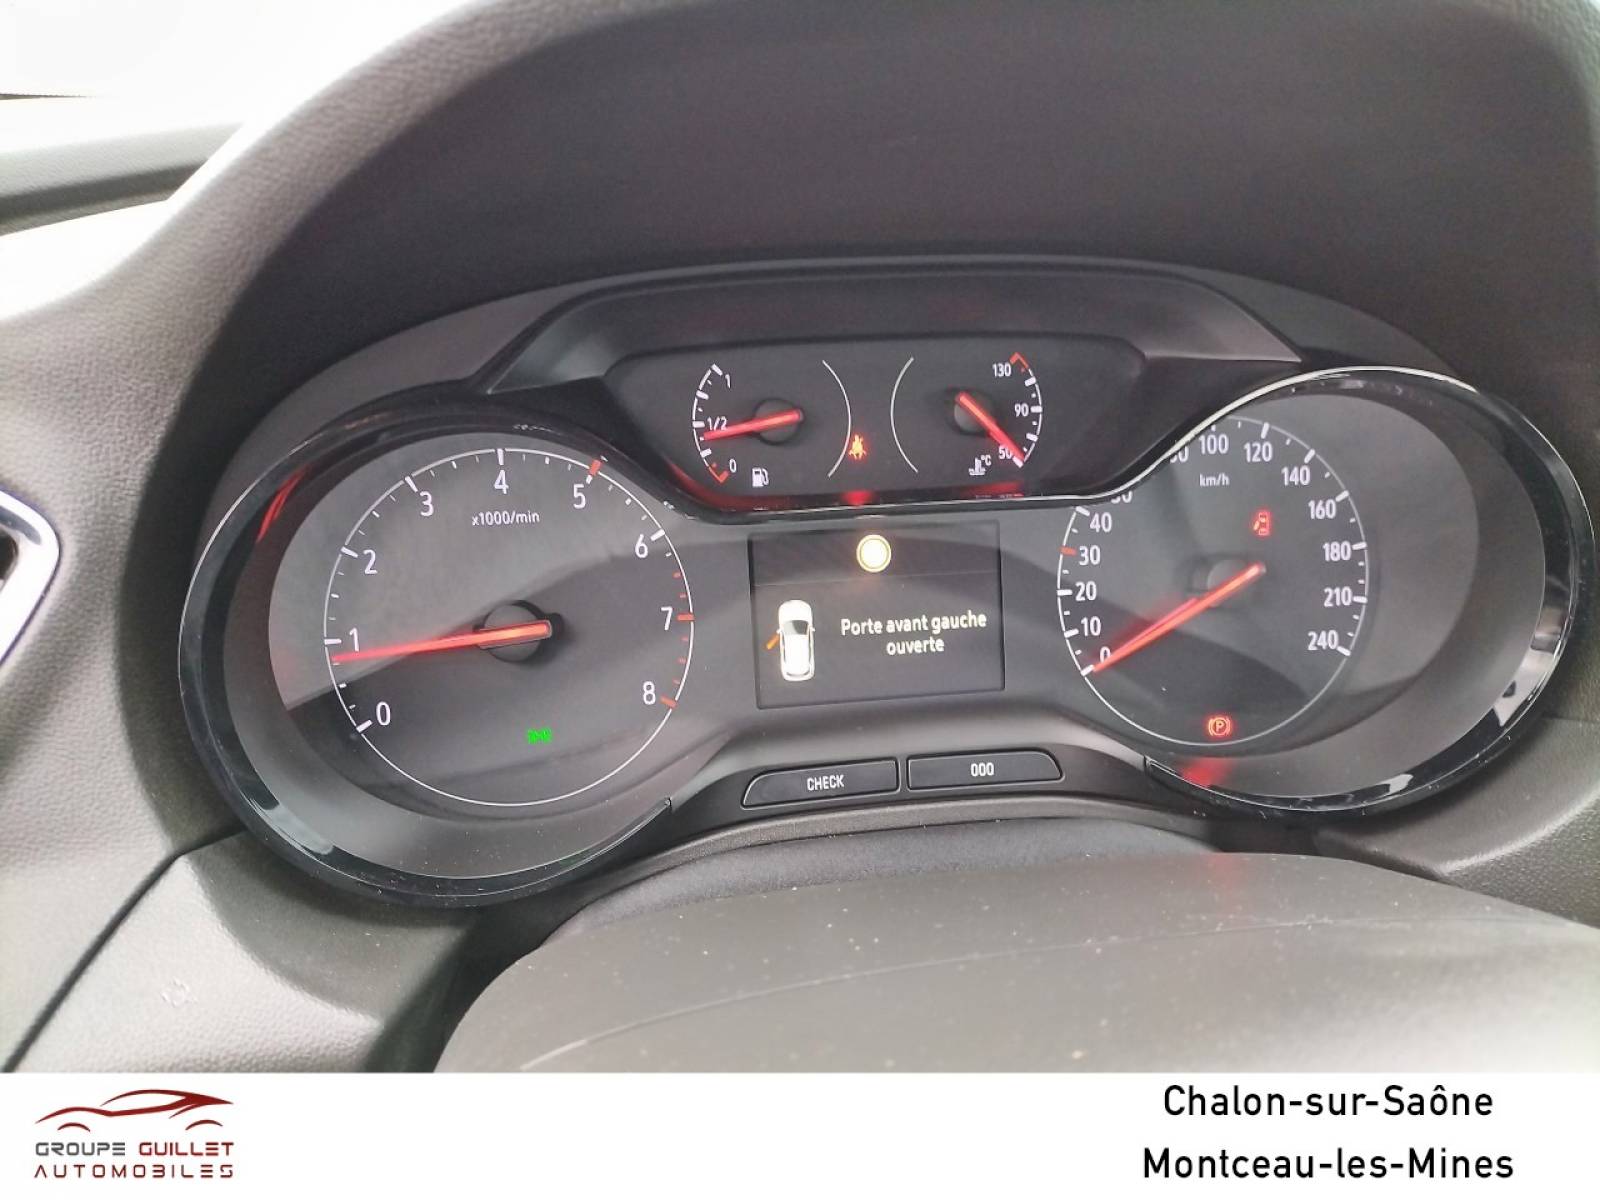 OPEL Grandland X 1.2 Turbo 130 ch - véhicule d'occasion - Groupe Guillet - Opel Magicauto Chalon - 71380 - Saint-Marcel - 15